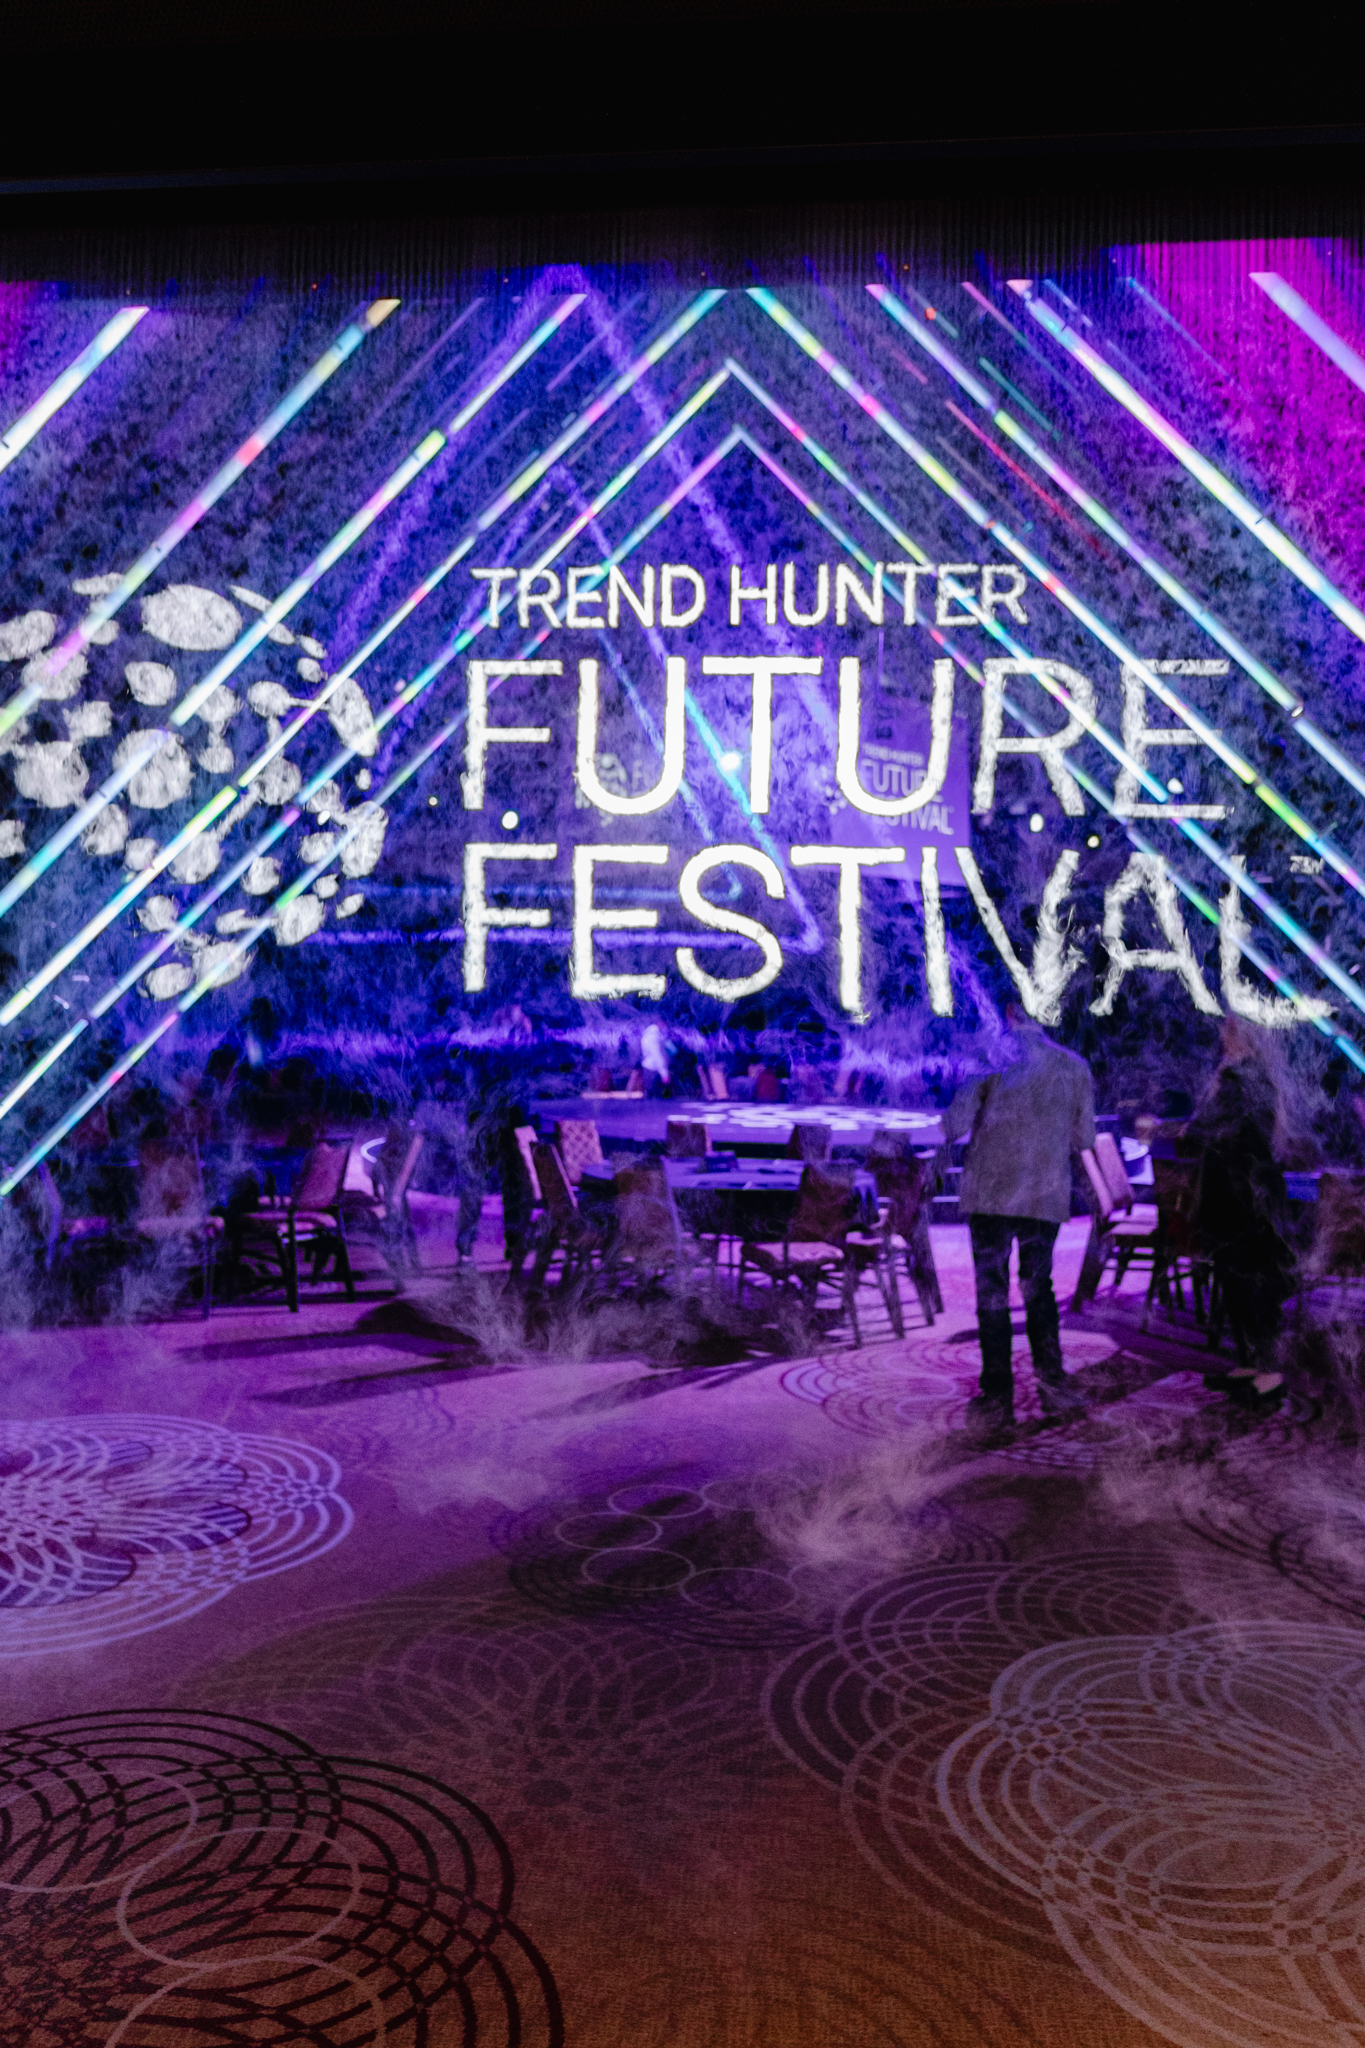 Trend hunters future festival featuring event photography.